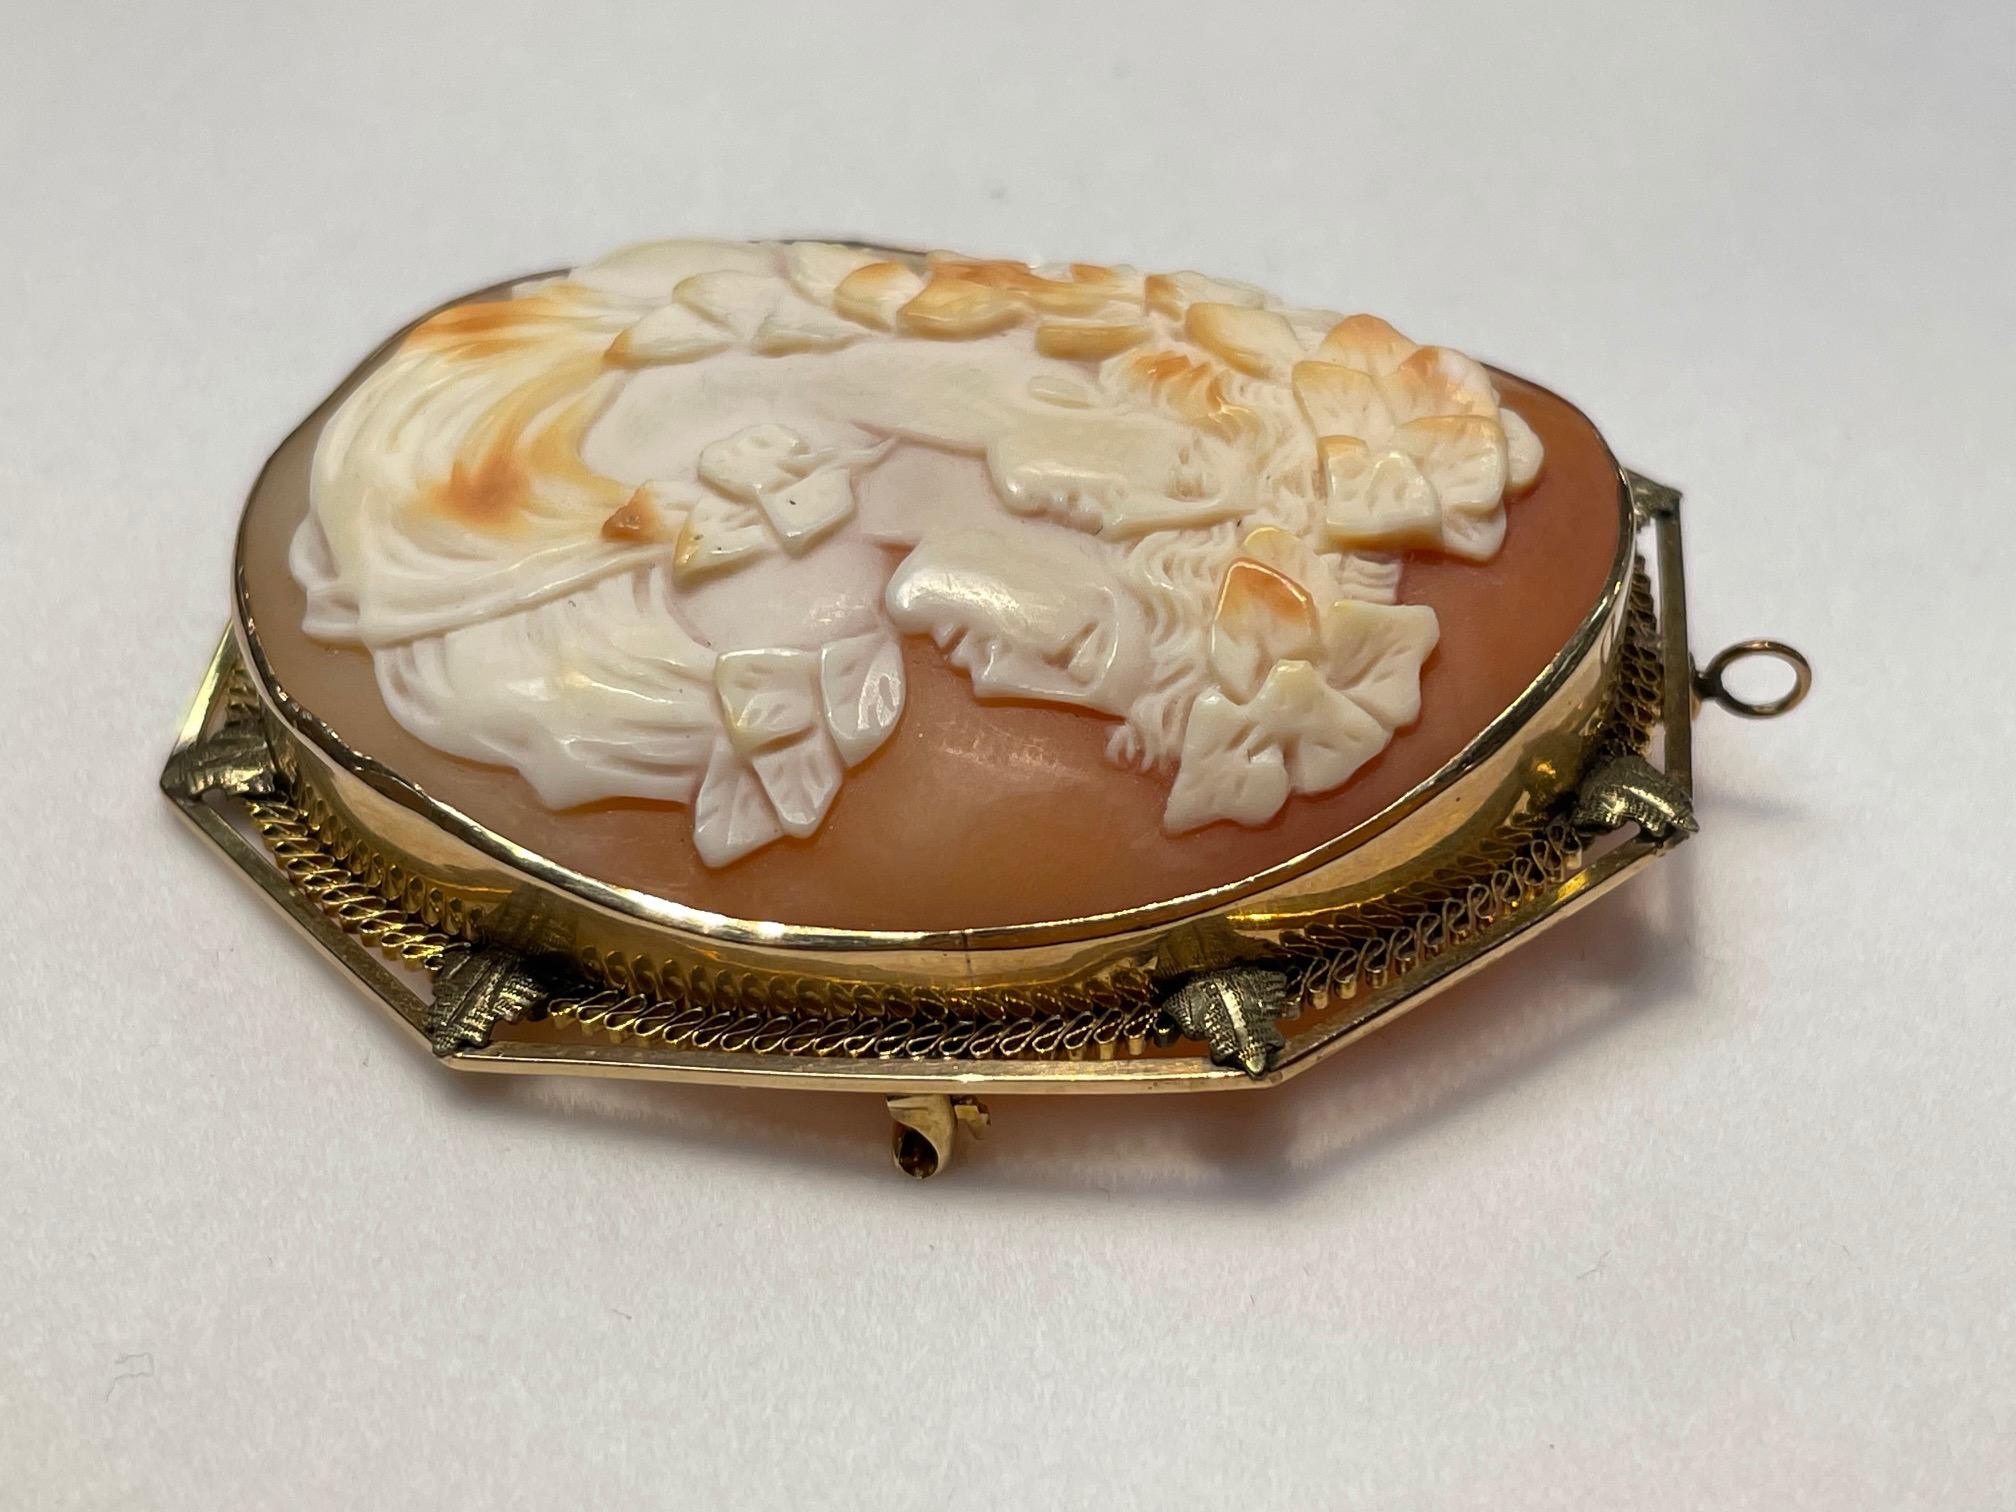 Awesome Antique Cameo Brooch Pendant depicting 2 Beautiful Young Ladies. Beautifully Hand Carved in High Relief Estate piece; Meticulously artisan engraved with exquisite detail, this natural carnelian shell cameo, securely set in a Hand crafted 14K